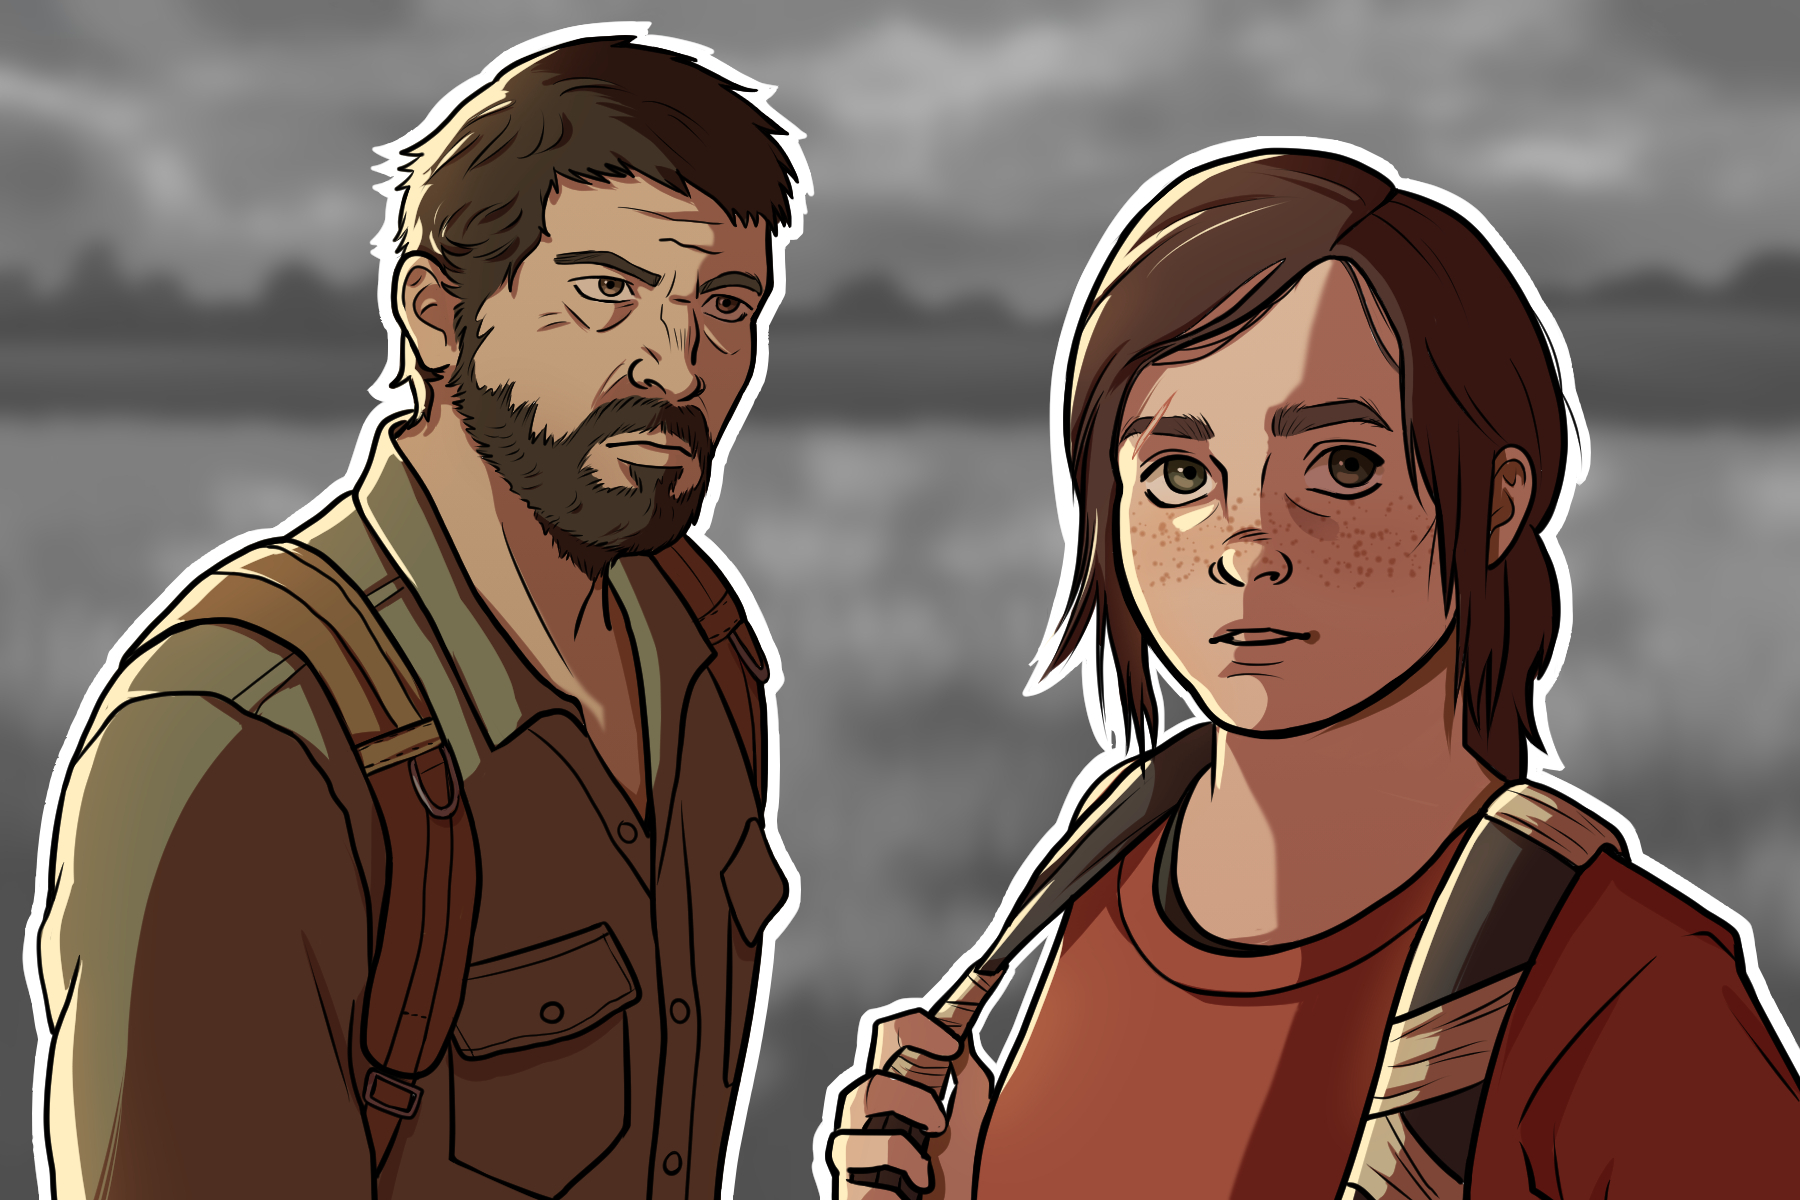 In an article about the video game The Last of Us, an illustration of the main characters